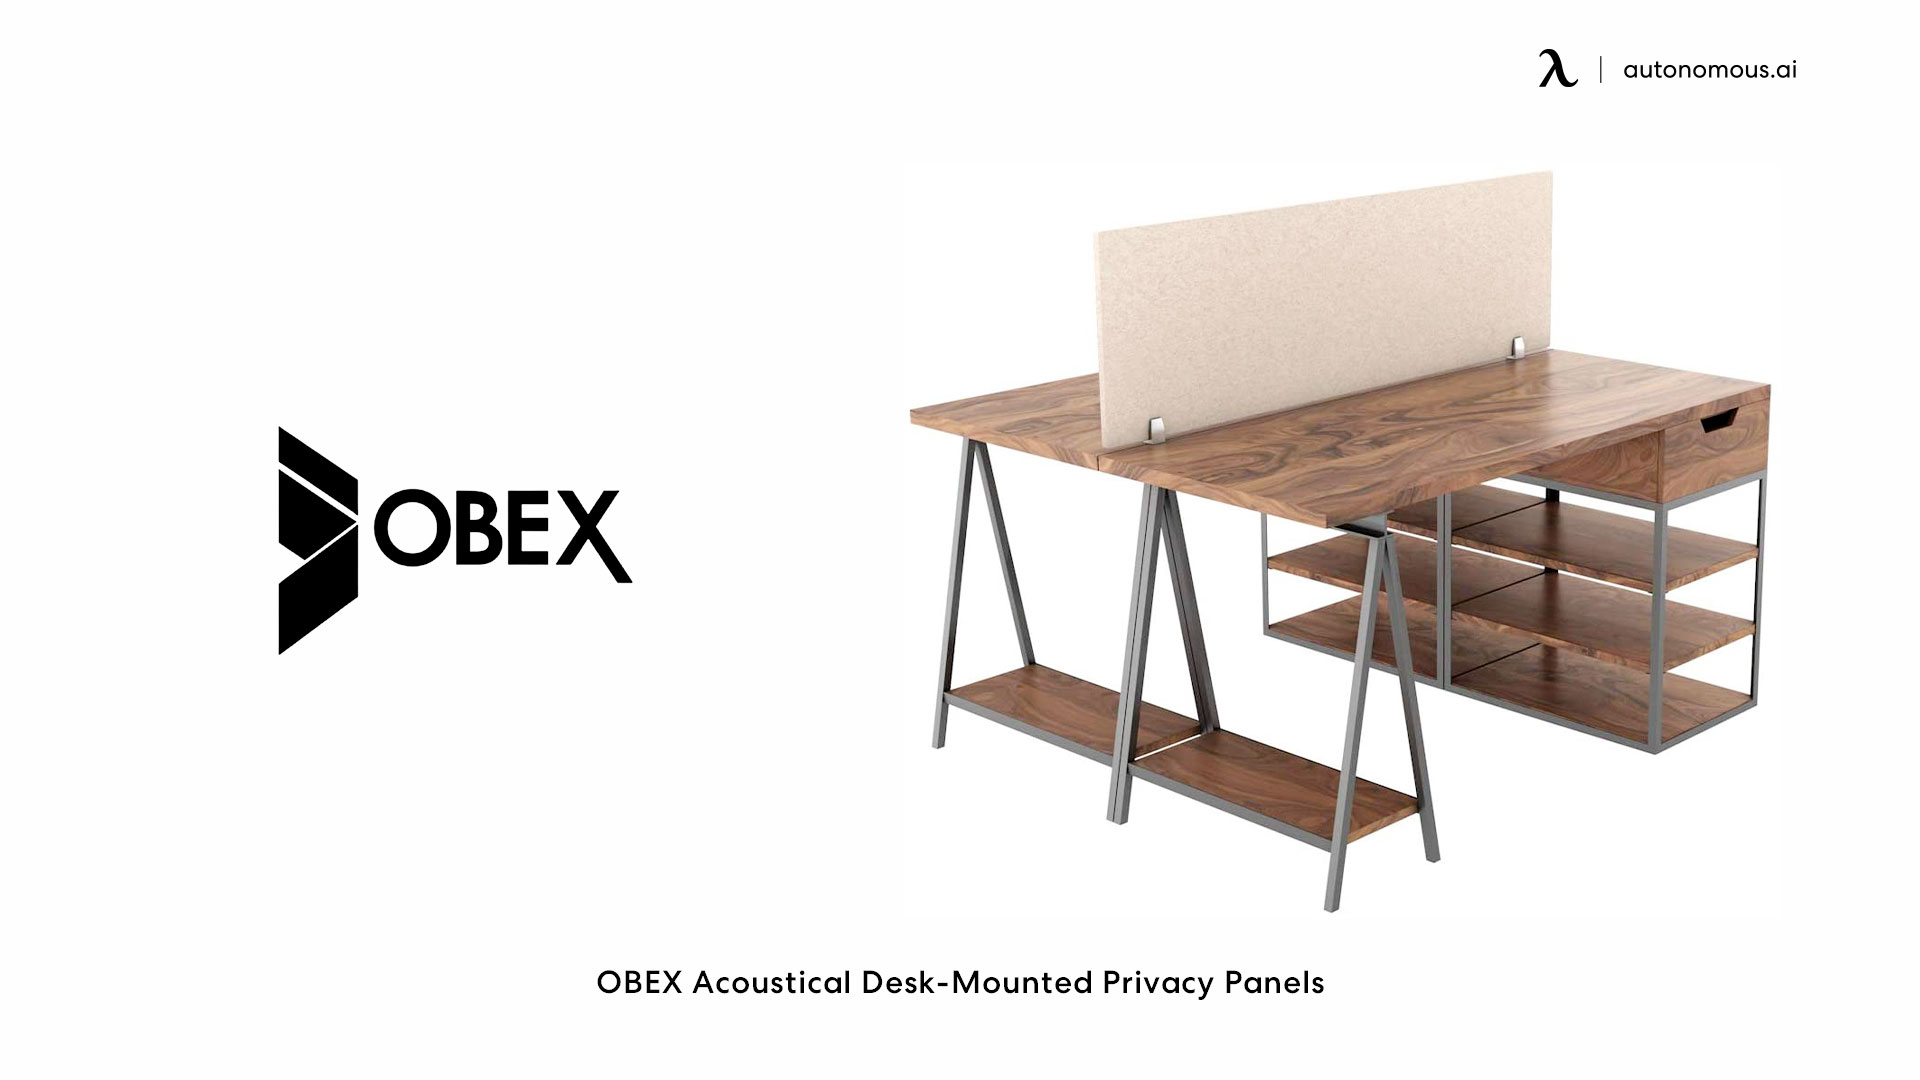 OBEX Acoustical Desk-Mounted Privacy Panels